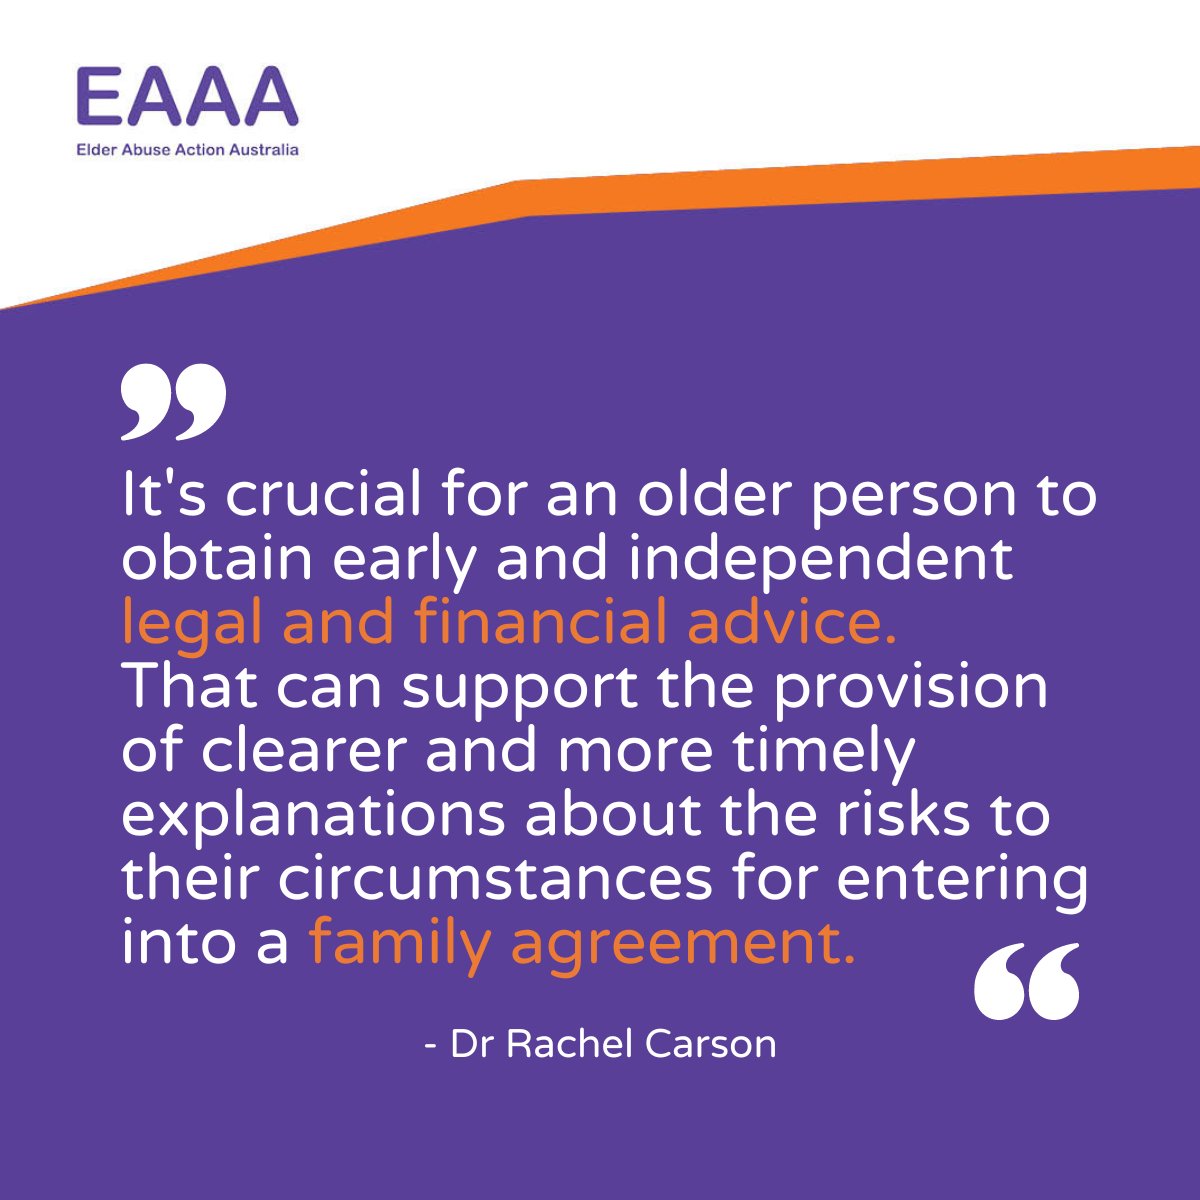 If someone you work with or know is looking to arrange a family agreement, it is important to encourage them to seek independent legal and financial advice first, says Dr Rachel Carson, Senior Research Fellow at @FamilyStudies. #FamilyAgreement #ElderAbuse